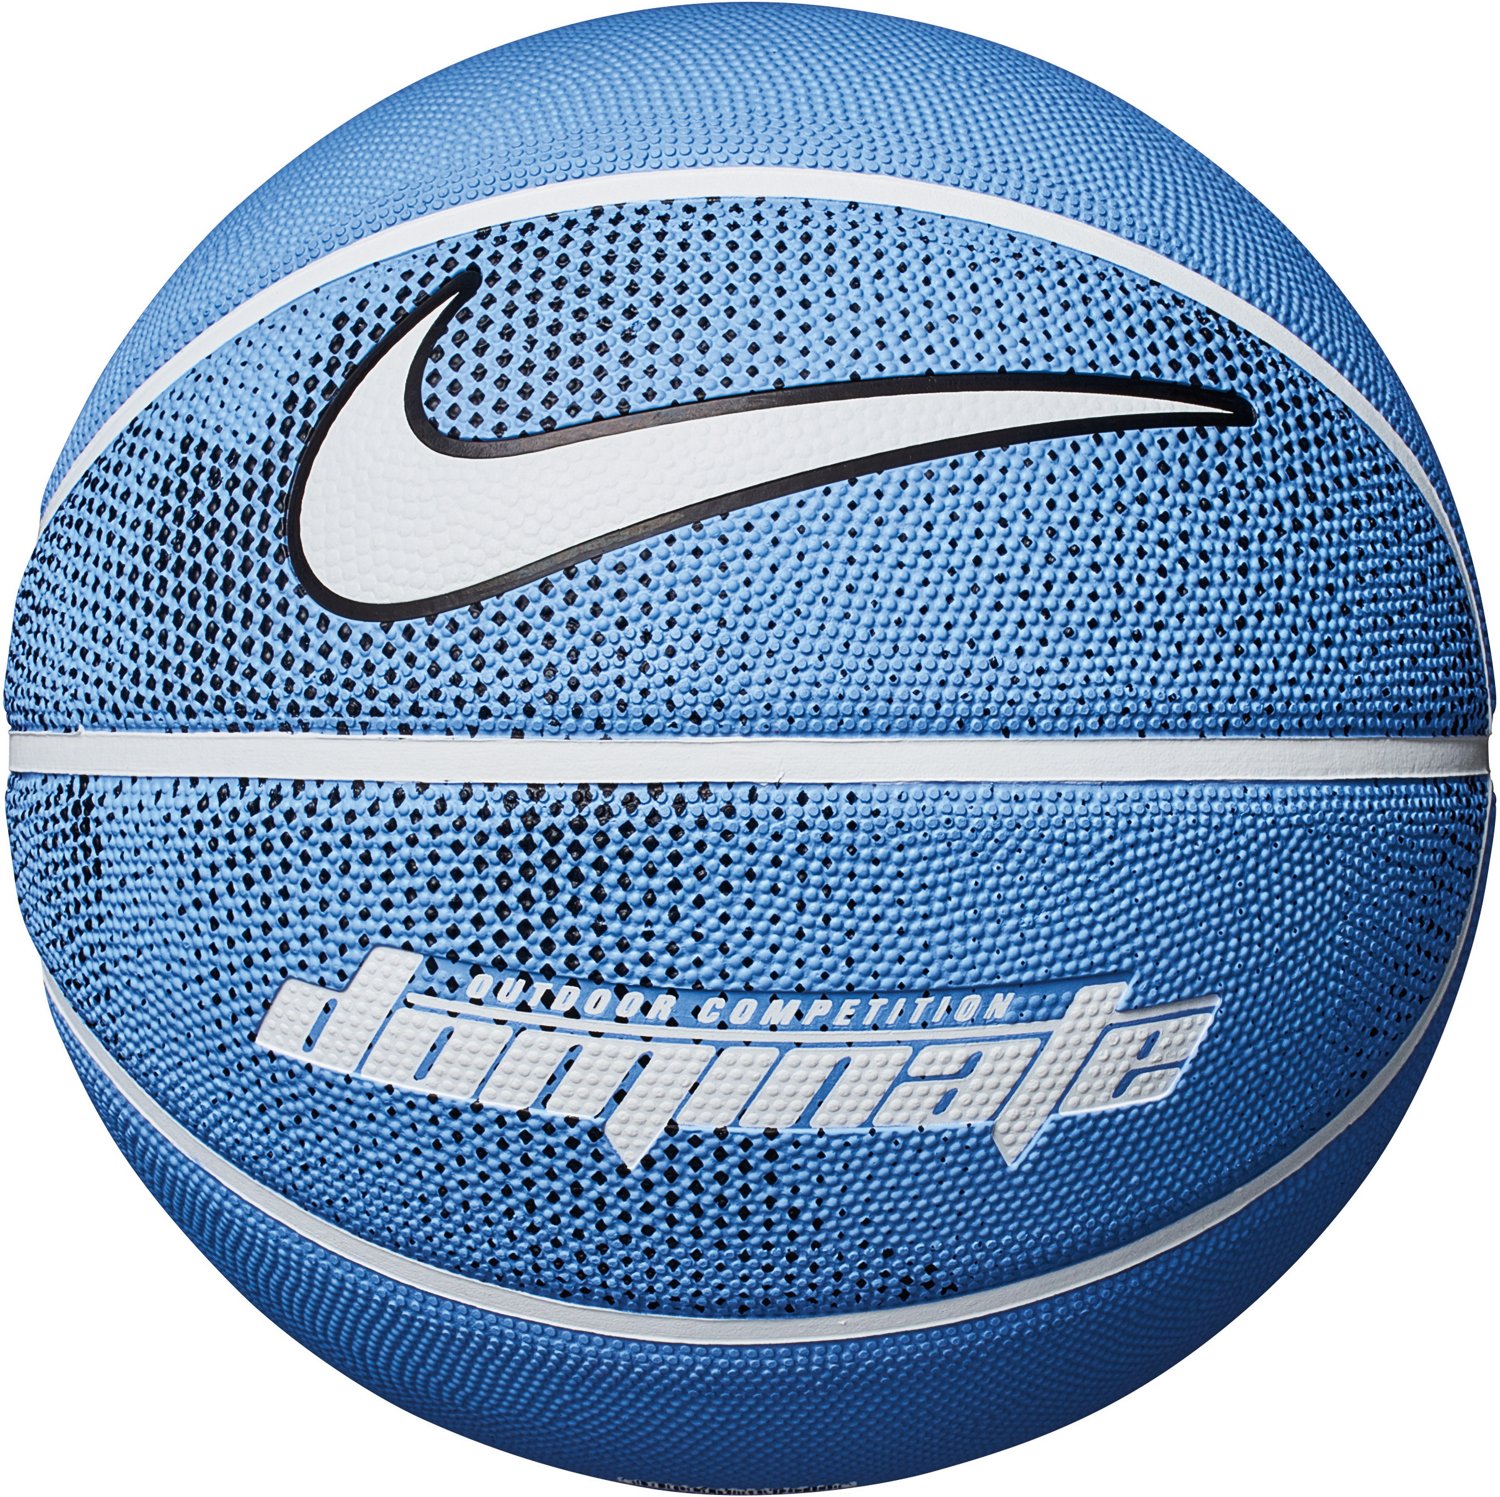 nike outdoor competition dominate basketball